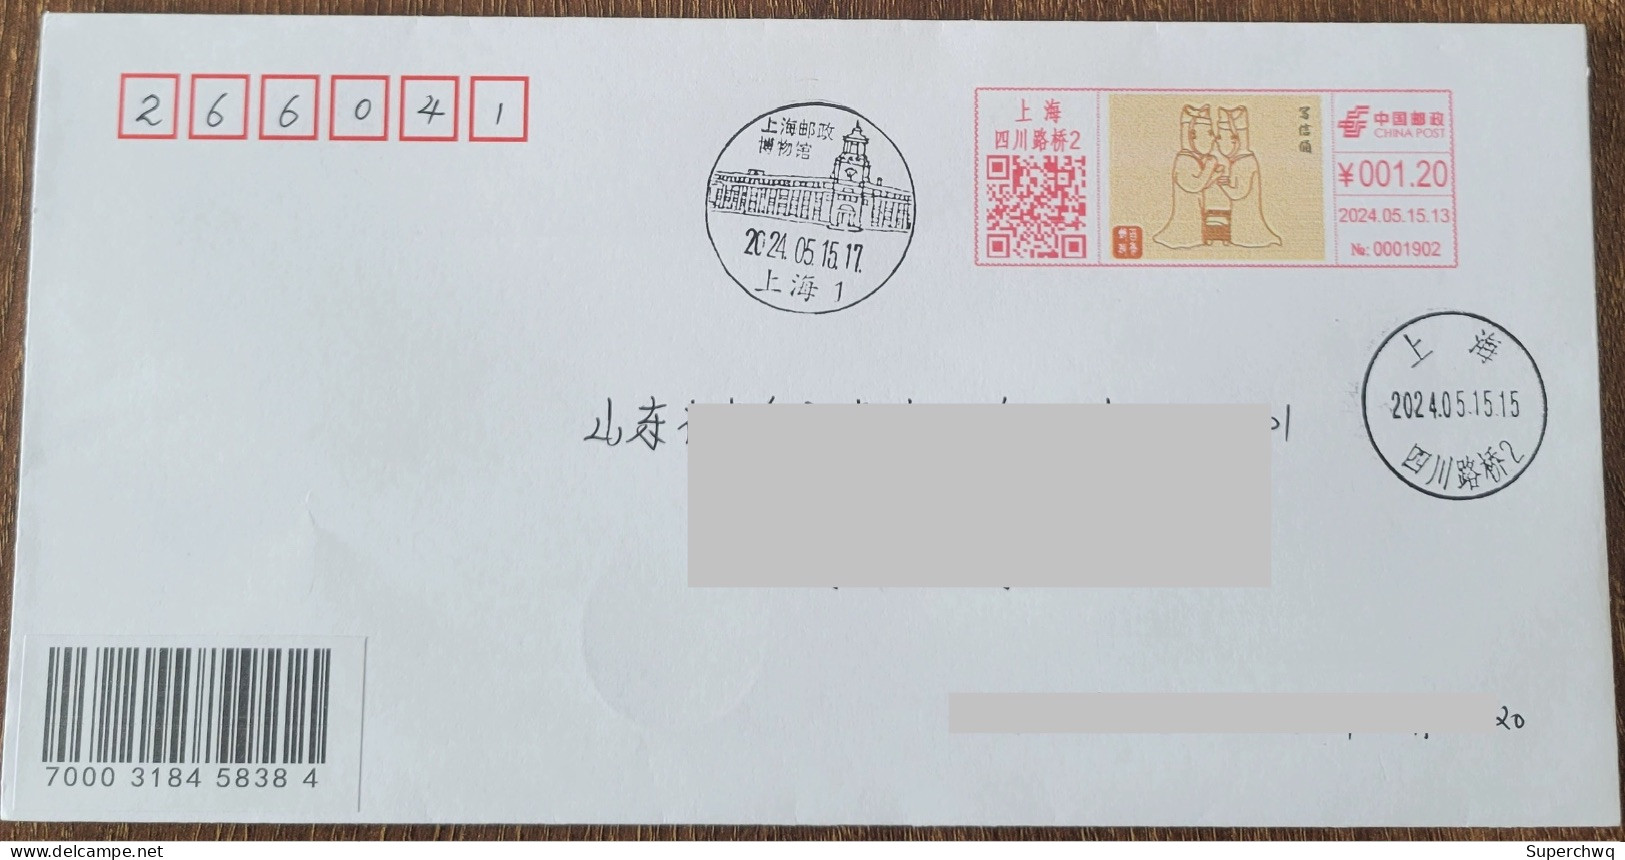 China Cover "The Posting Terracotta Warriors" (Shanghai) Colored Postage Machine Stamp First Day Actual Postage Seal - Postcards